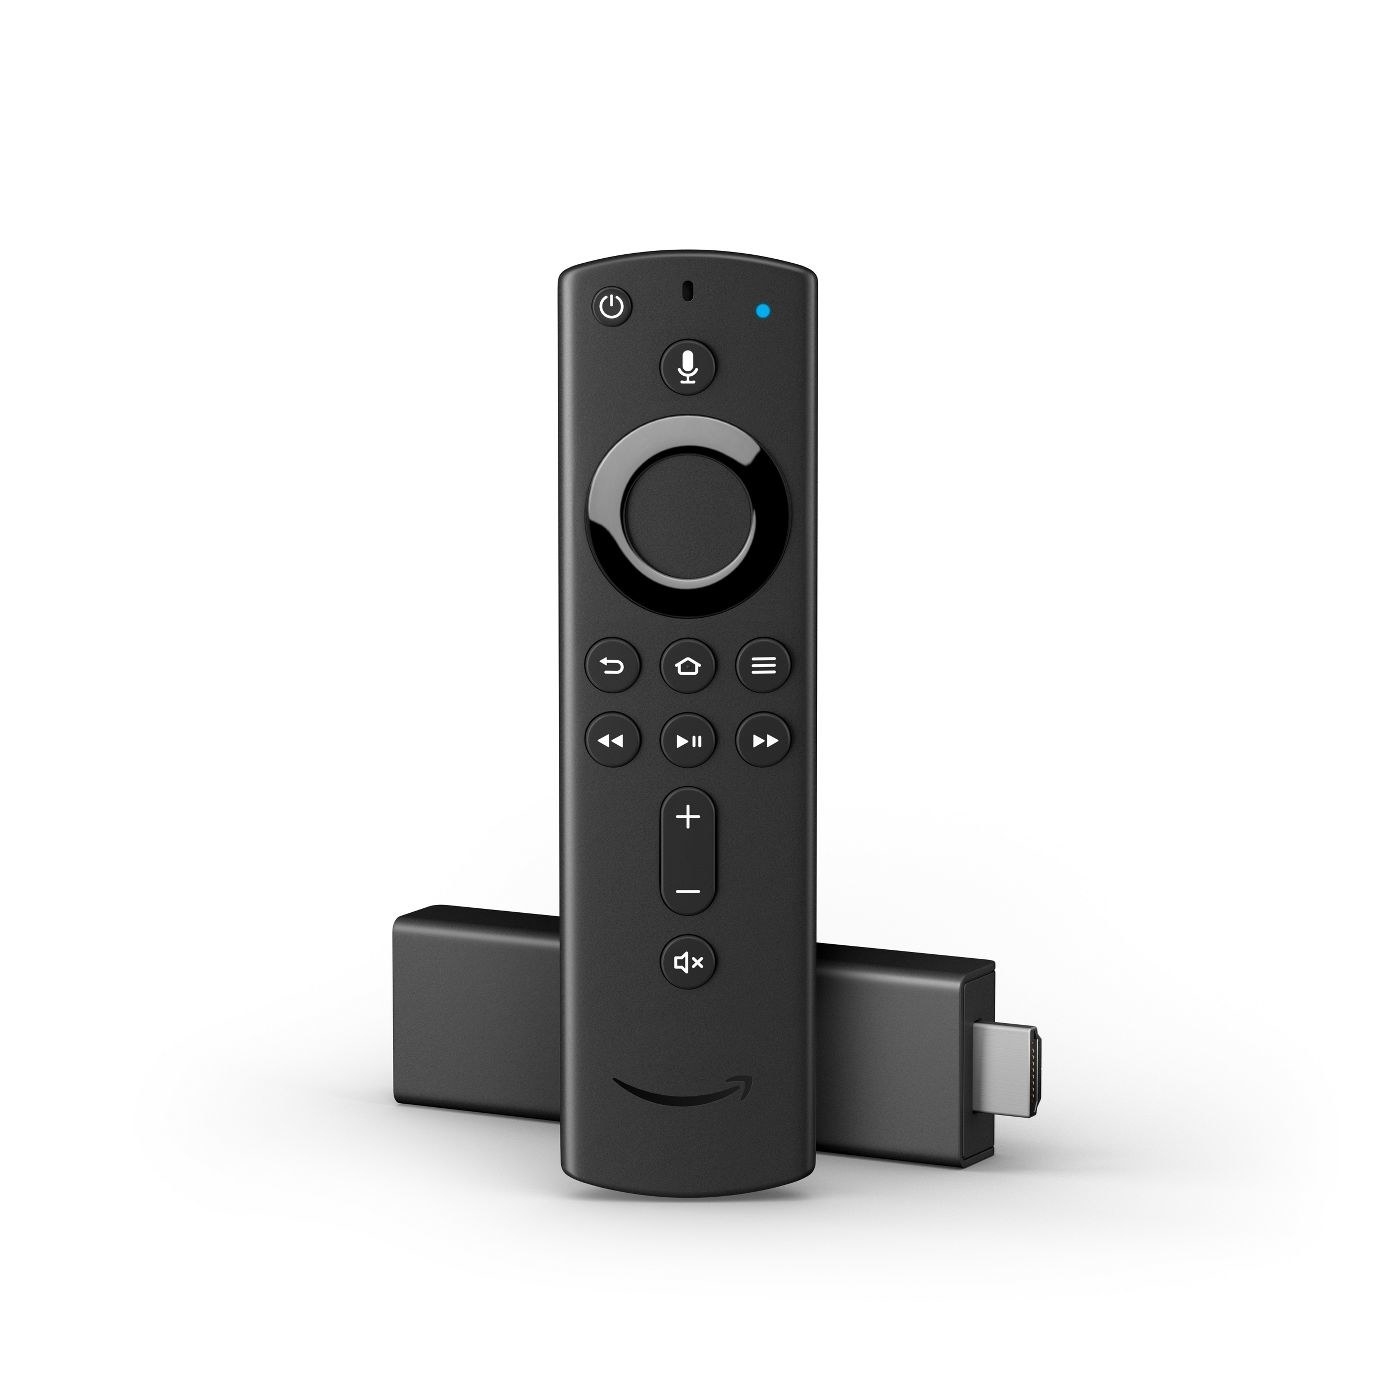 The Fire TV Stick and remote, which are both very small